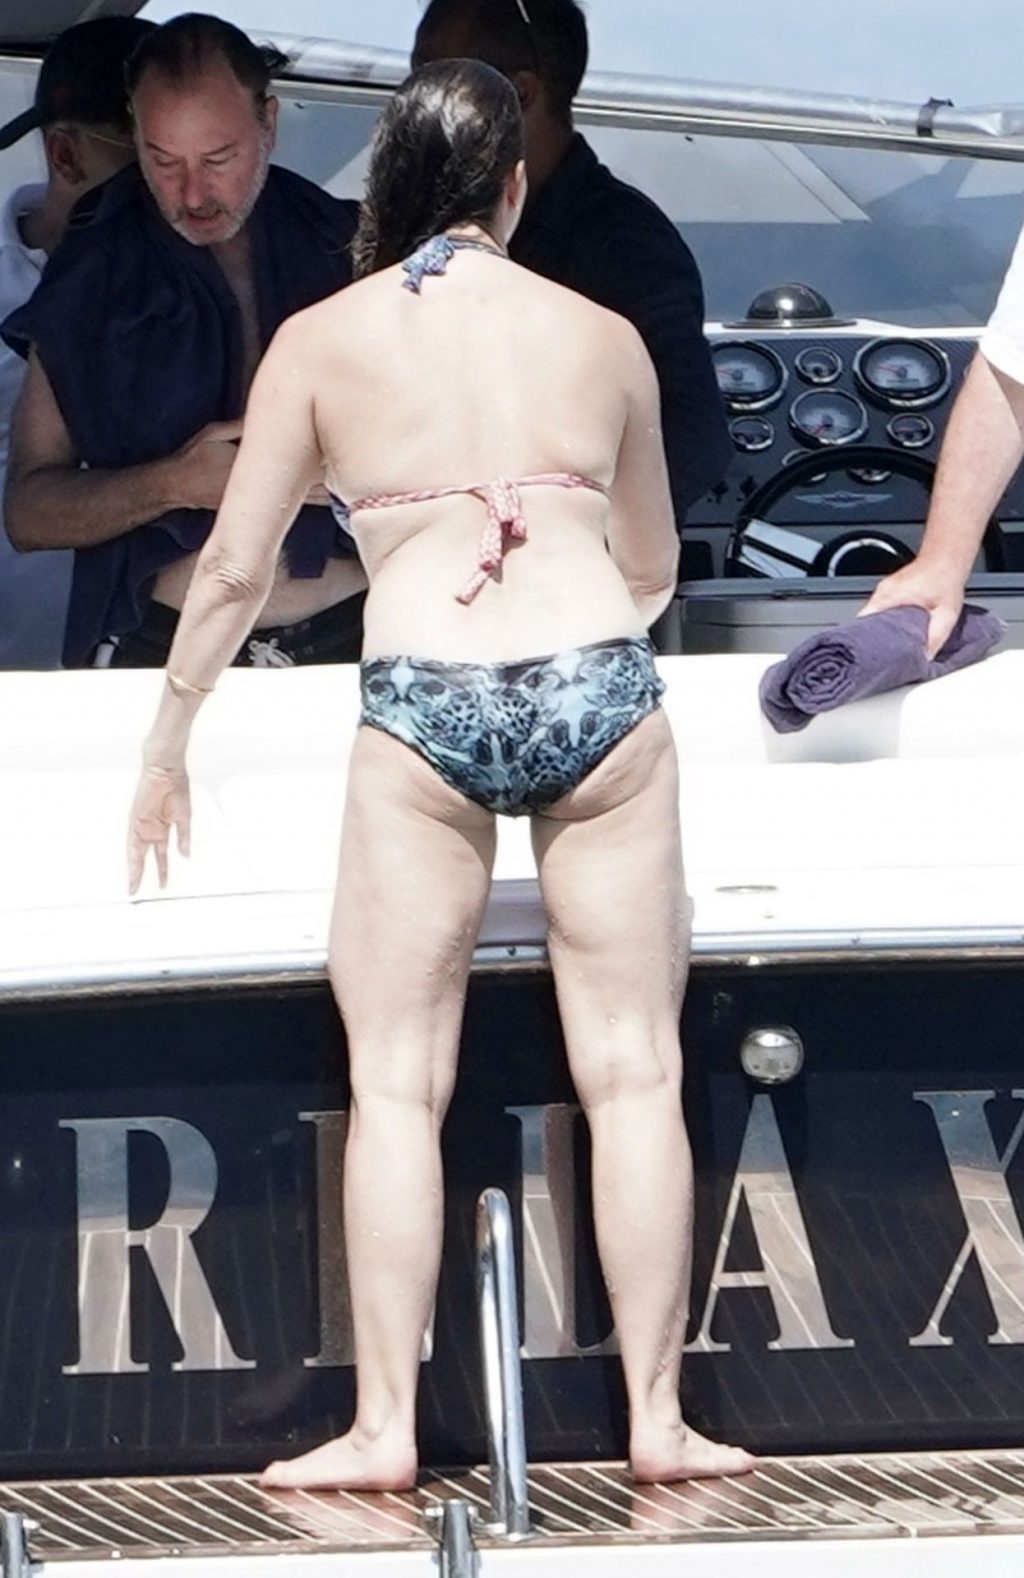 Gina Gershon is Pictured in a Bikini on a Boat (47 Photos)